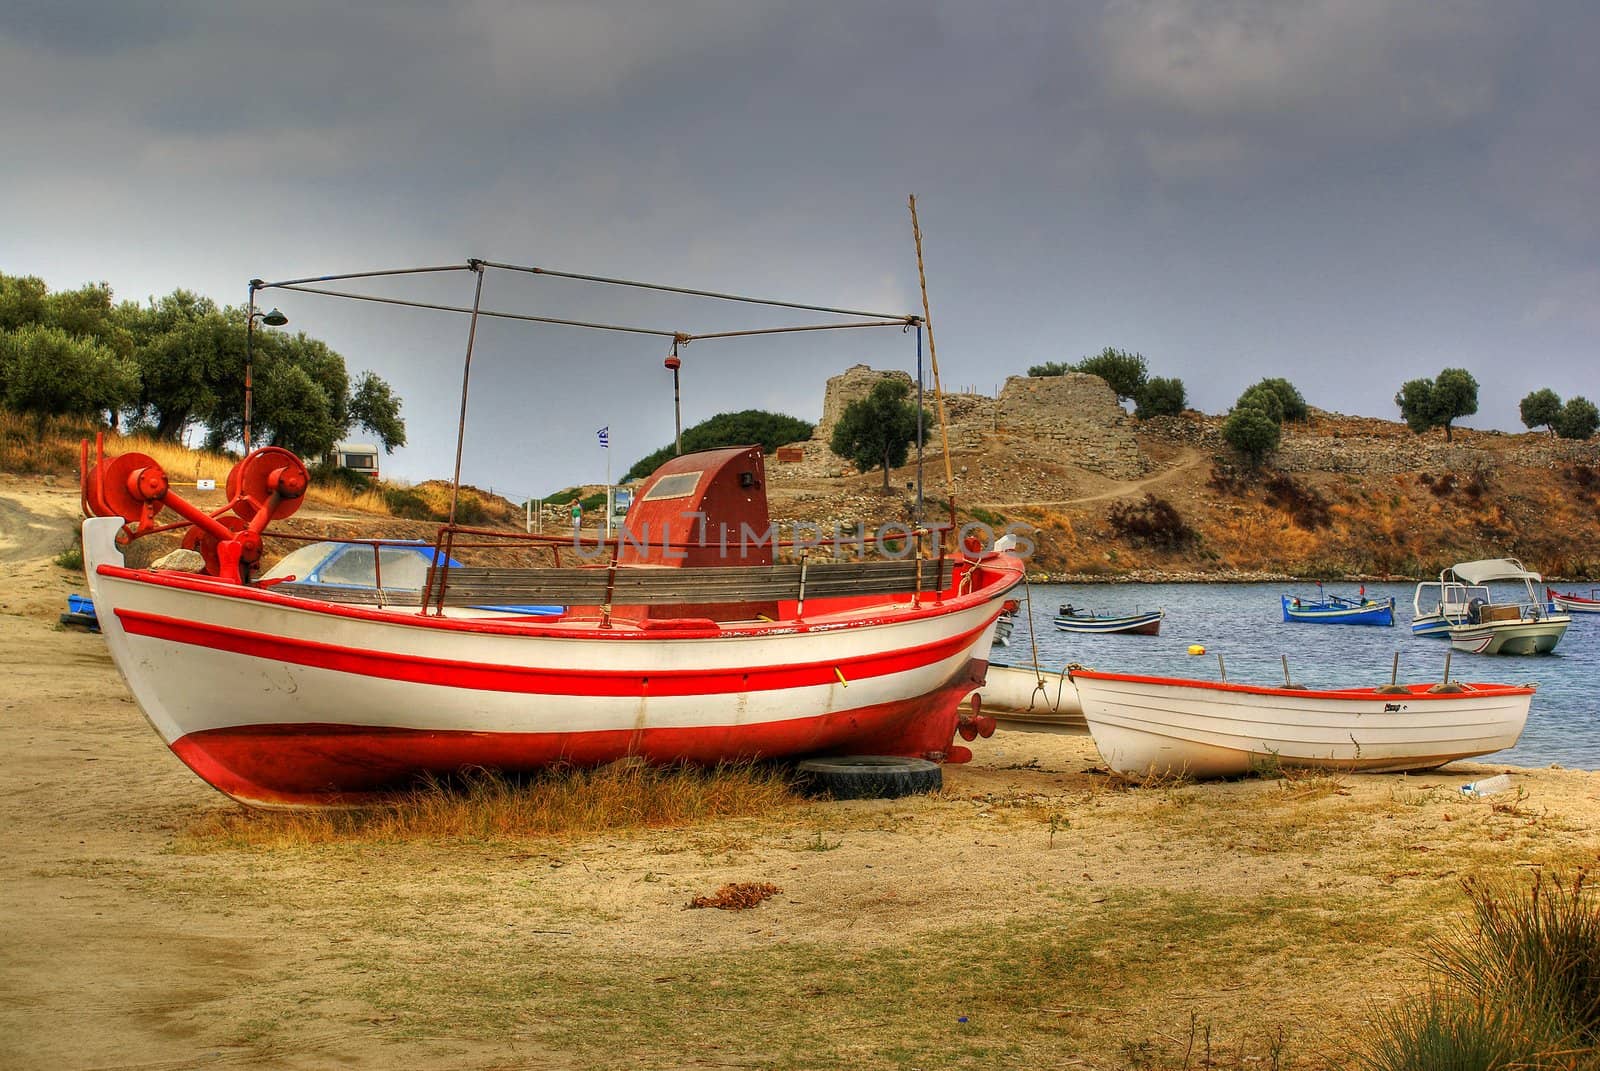 Two fishermen's boats on dry land in Toroni (Halkidiki Greece) - HDR Picture